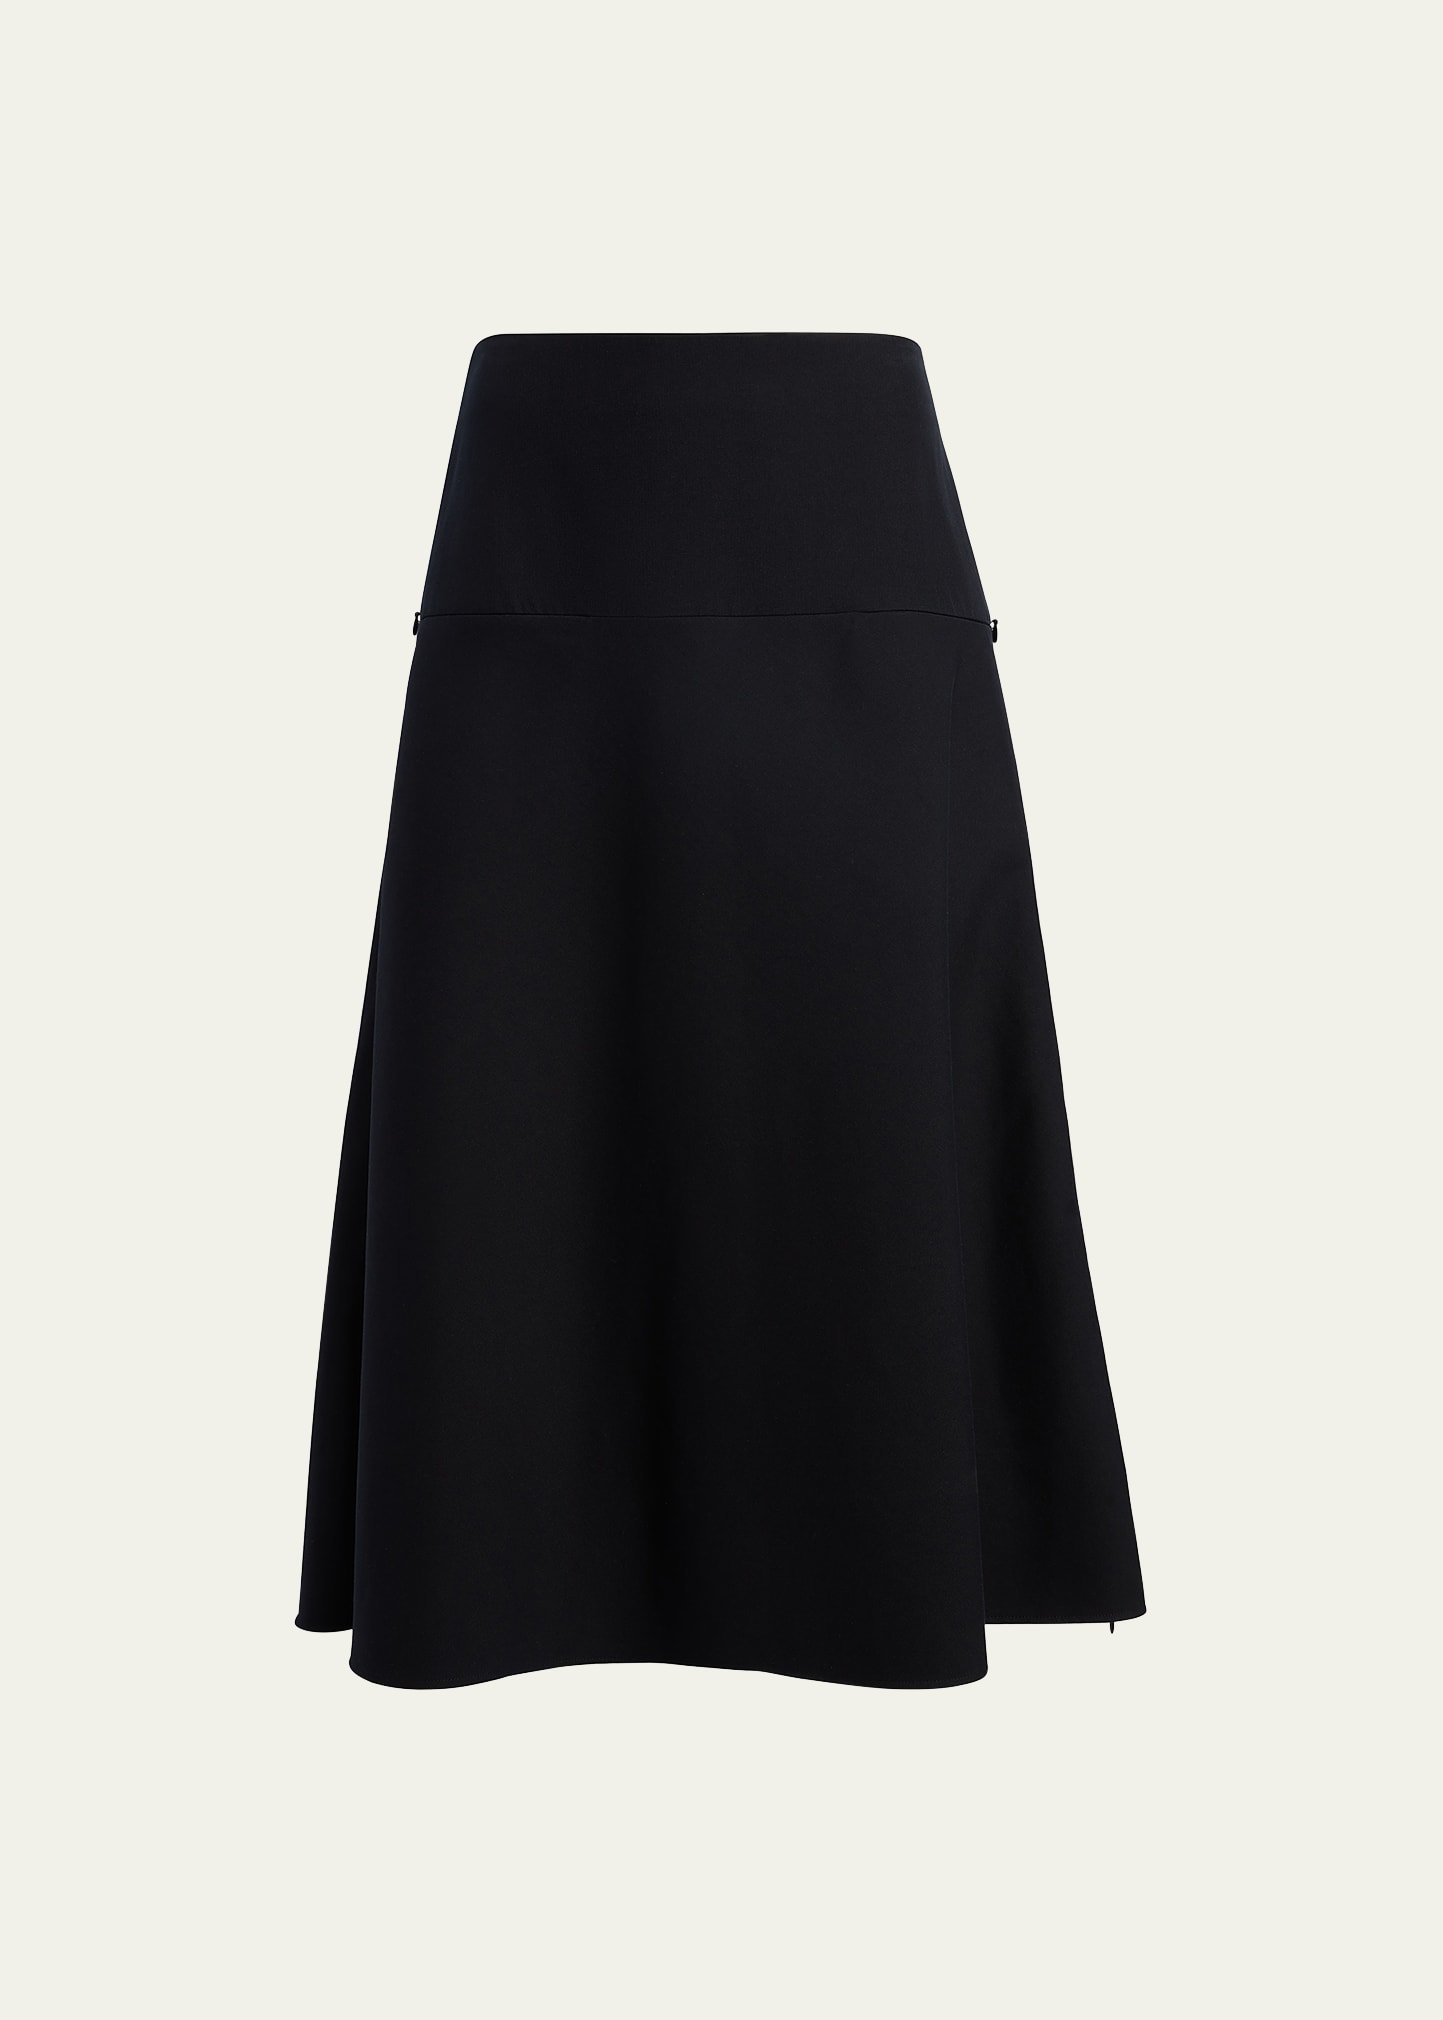 Another Tomorrow Contrast A-line Skirt With Zipper Detail In Black/cream